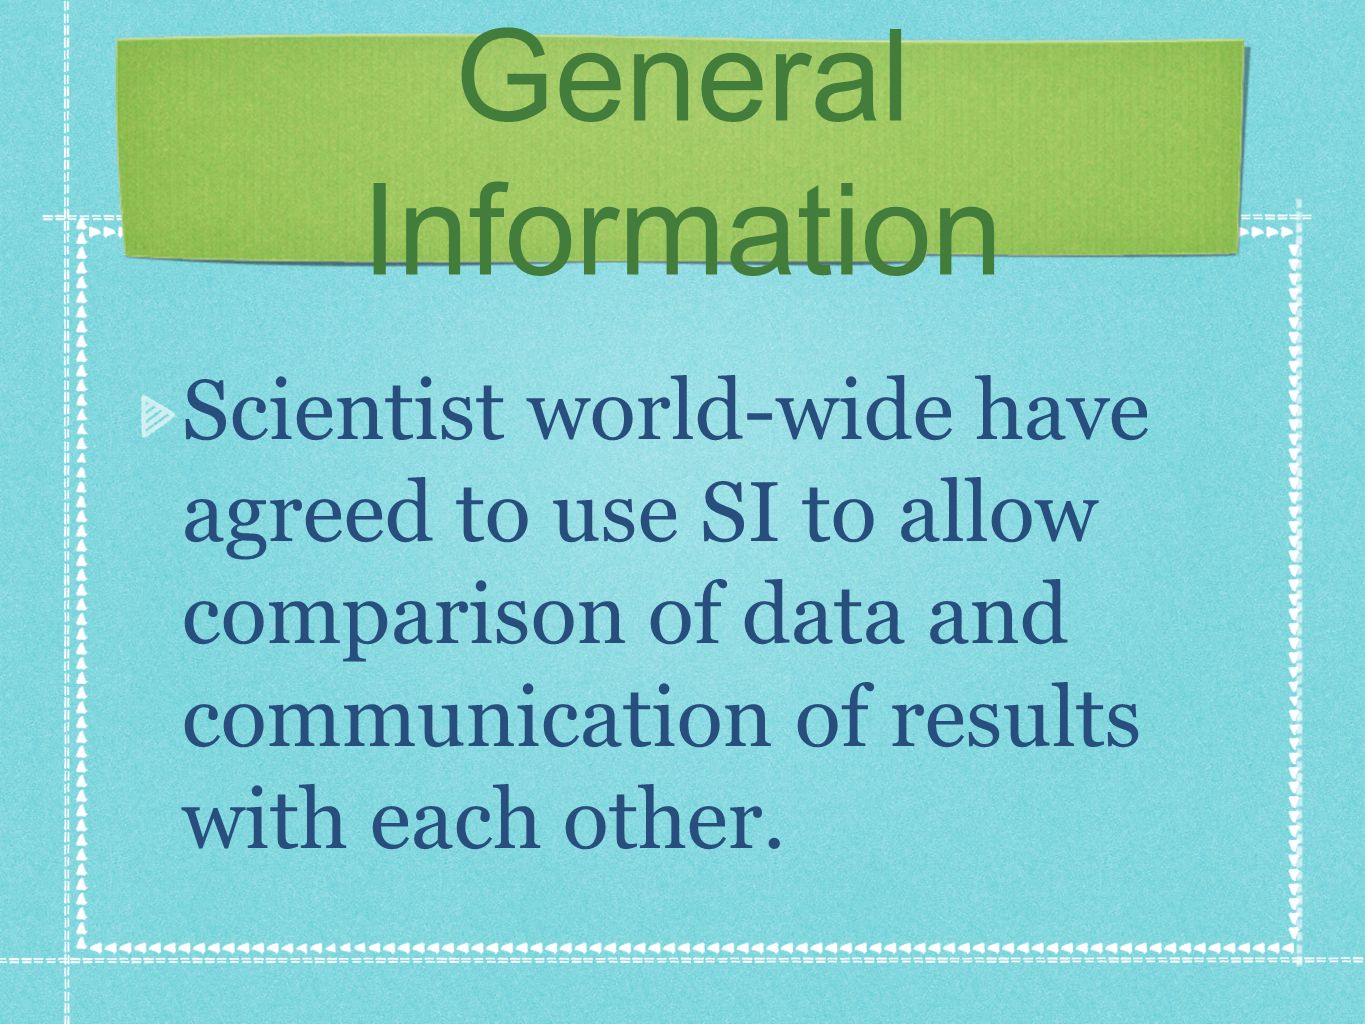 General Information Scientist world-wide have agreed to use SI to allow comparison of data and communication of results with each other.